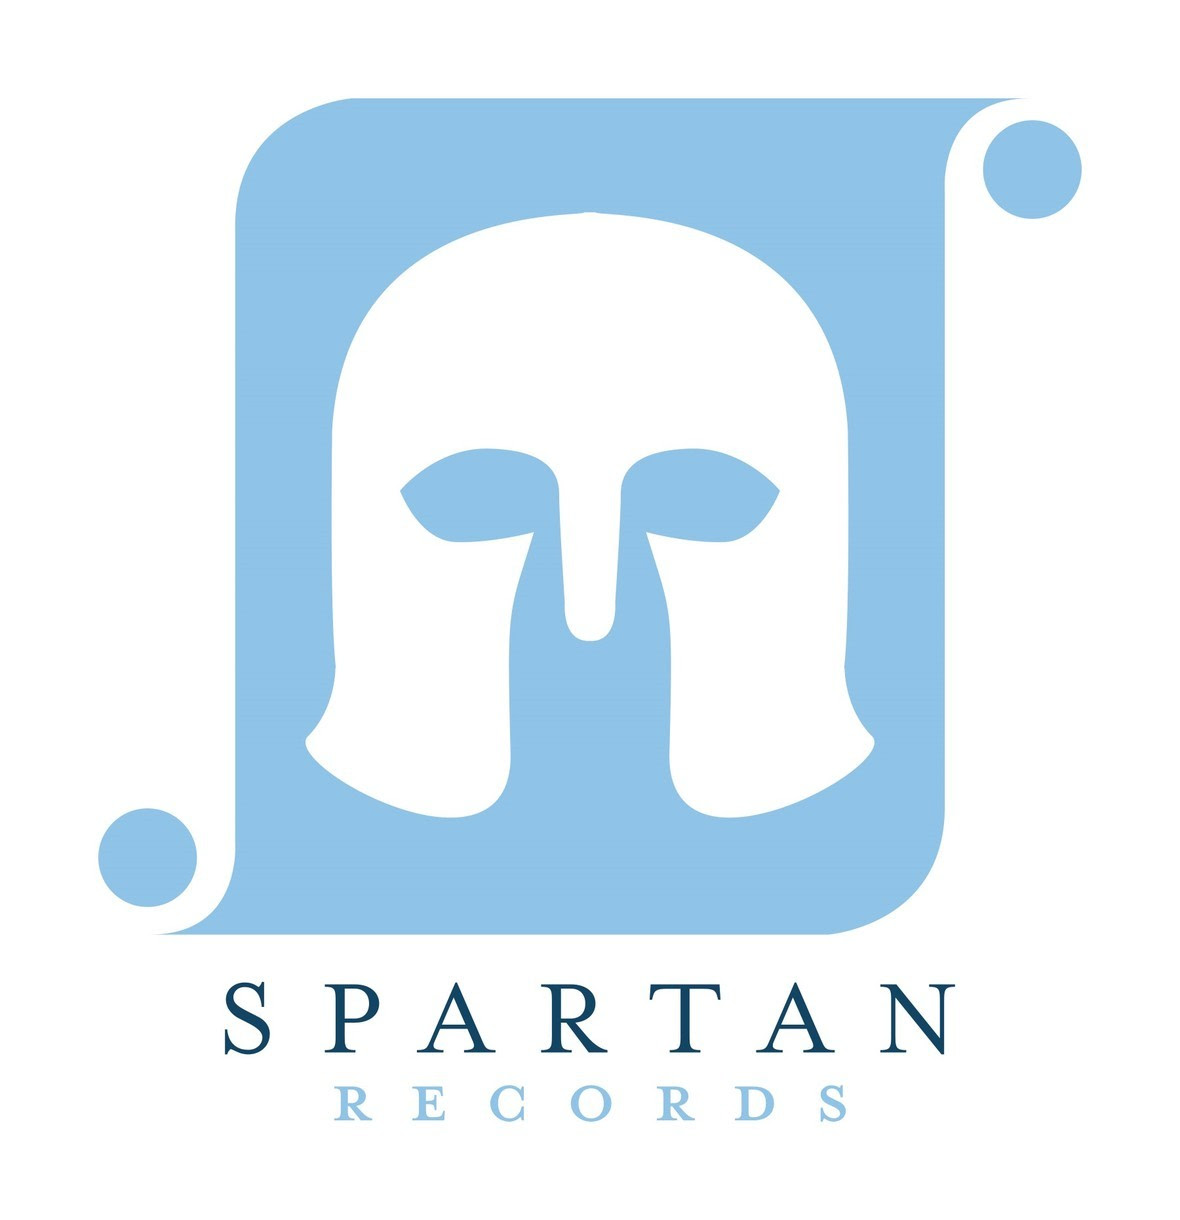 spartan records logo june 2015 use this one